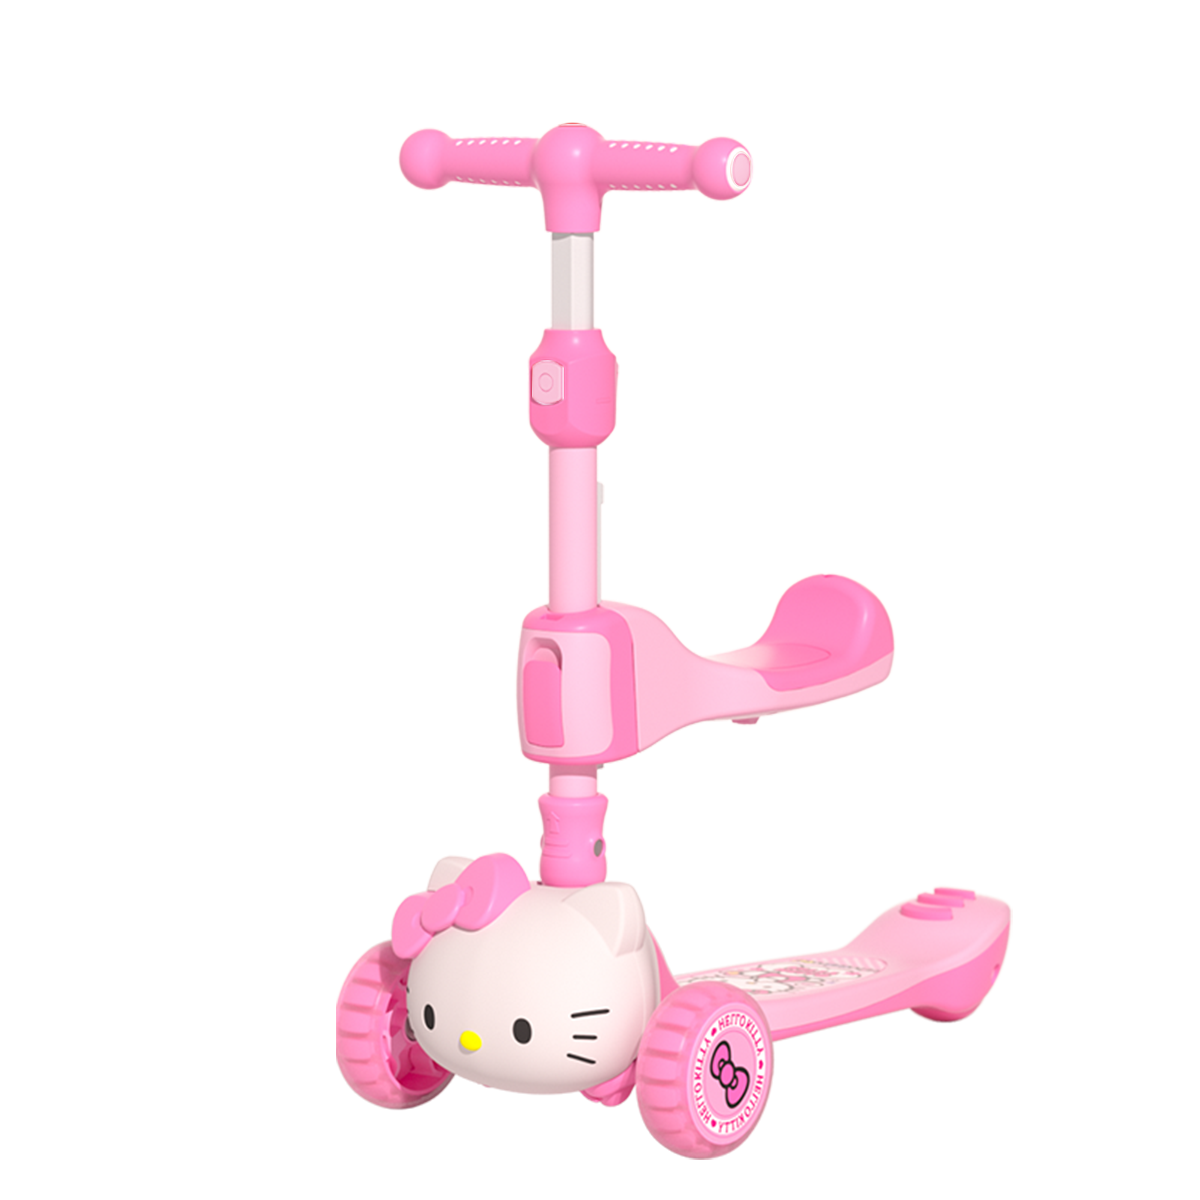 Hello Kitty 3D Kids Scooter 2in1/ 3in1 21339